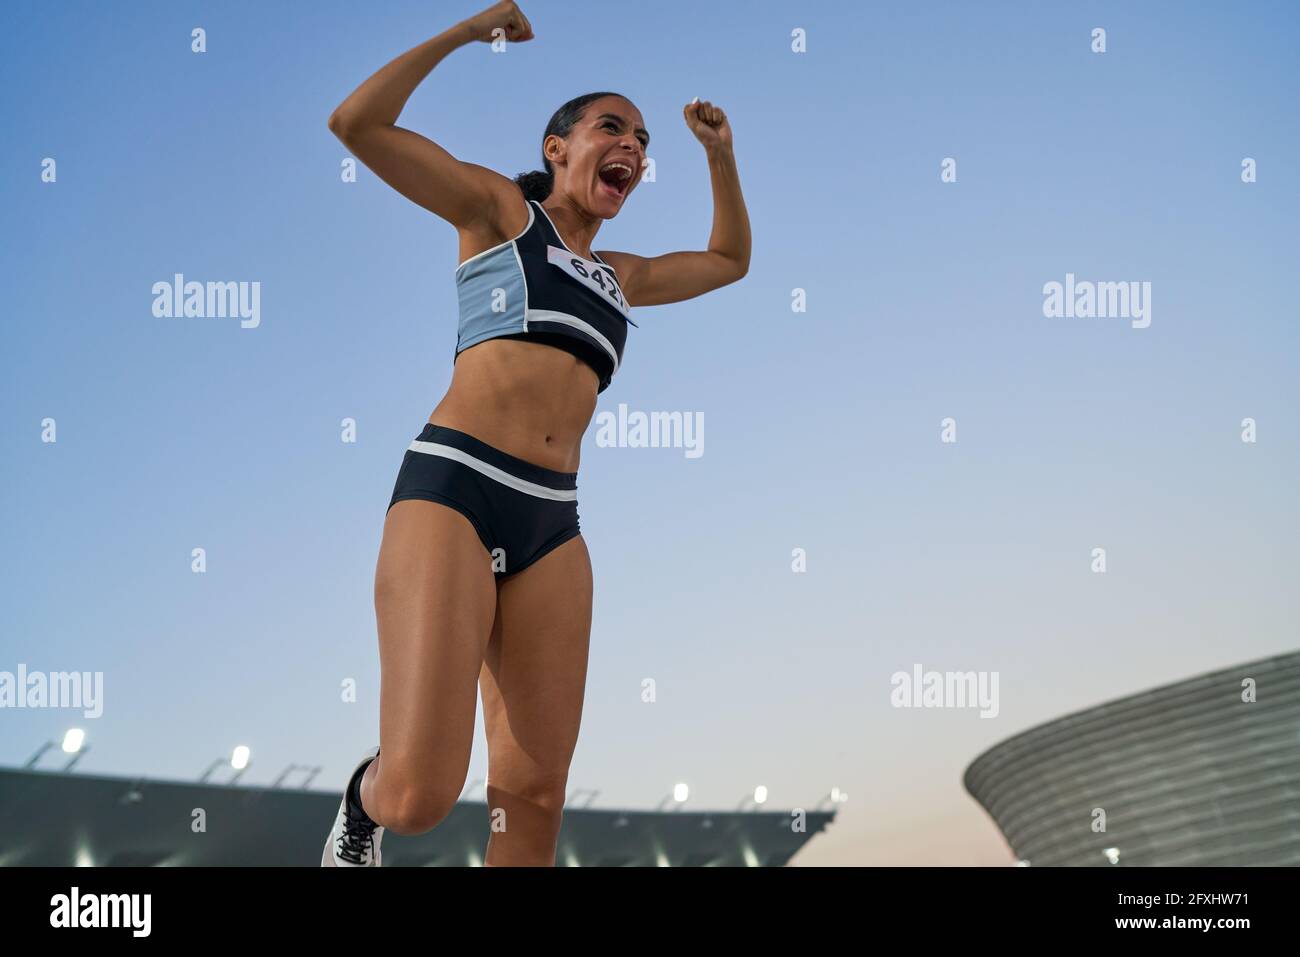 Excited track and field athlete celebrating victory Stock Photo